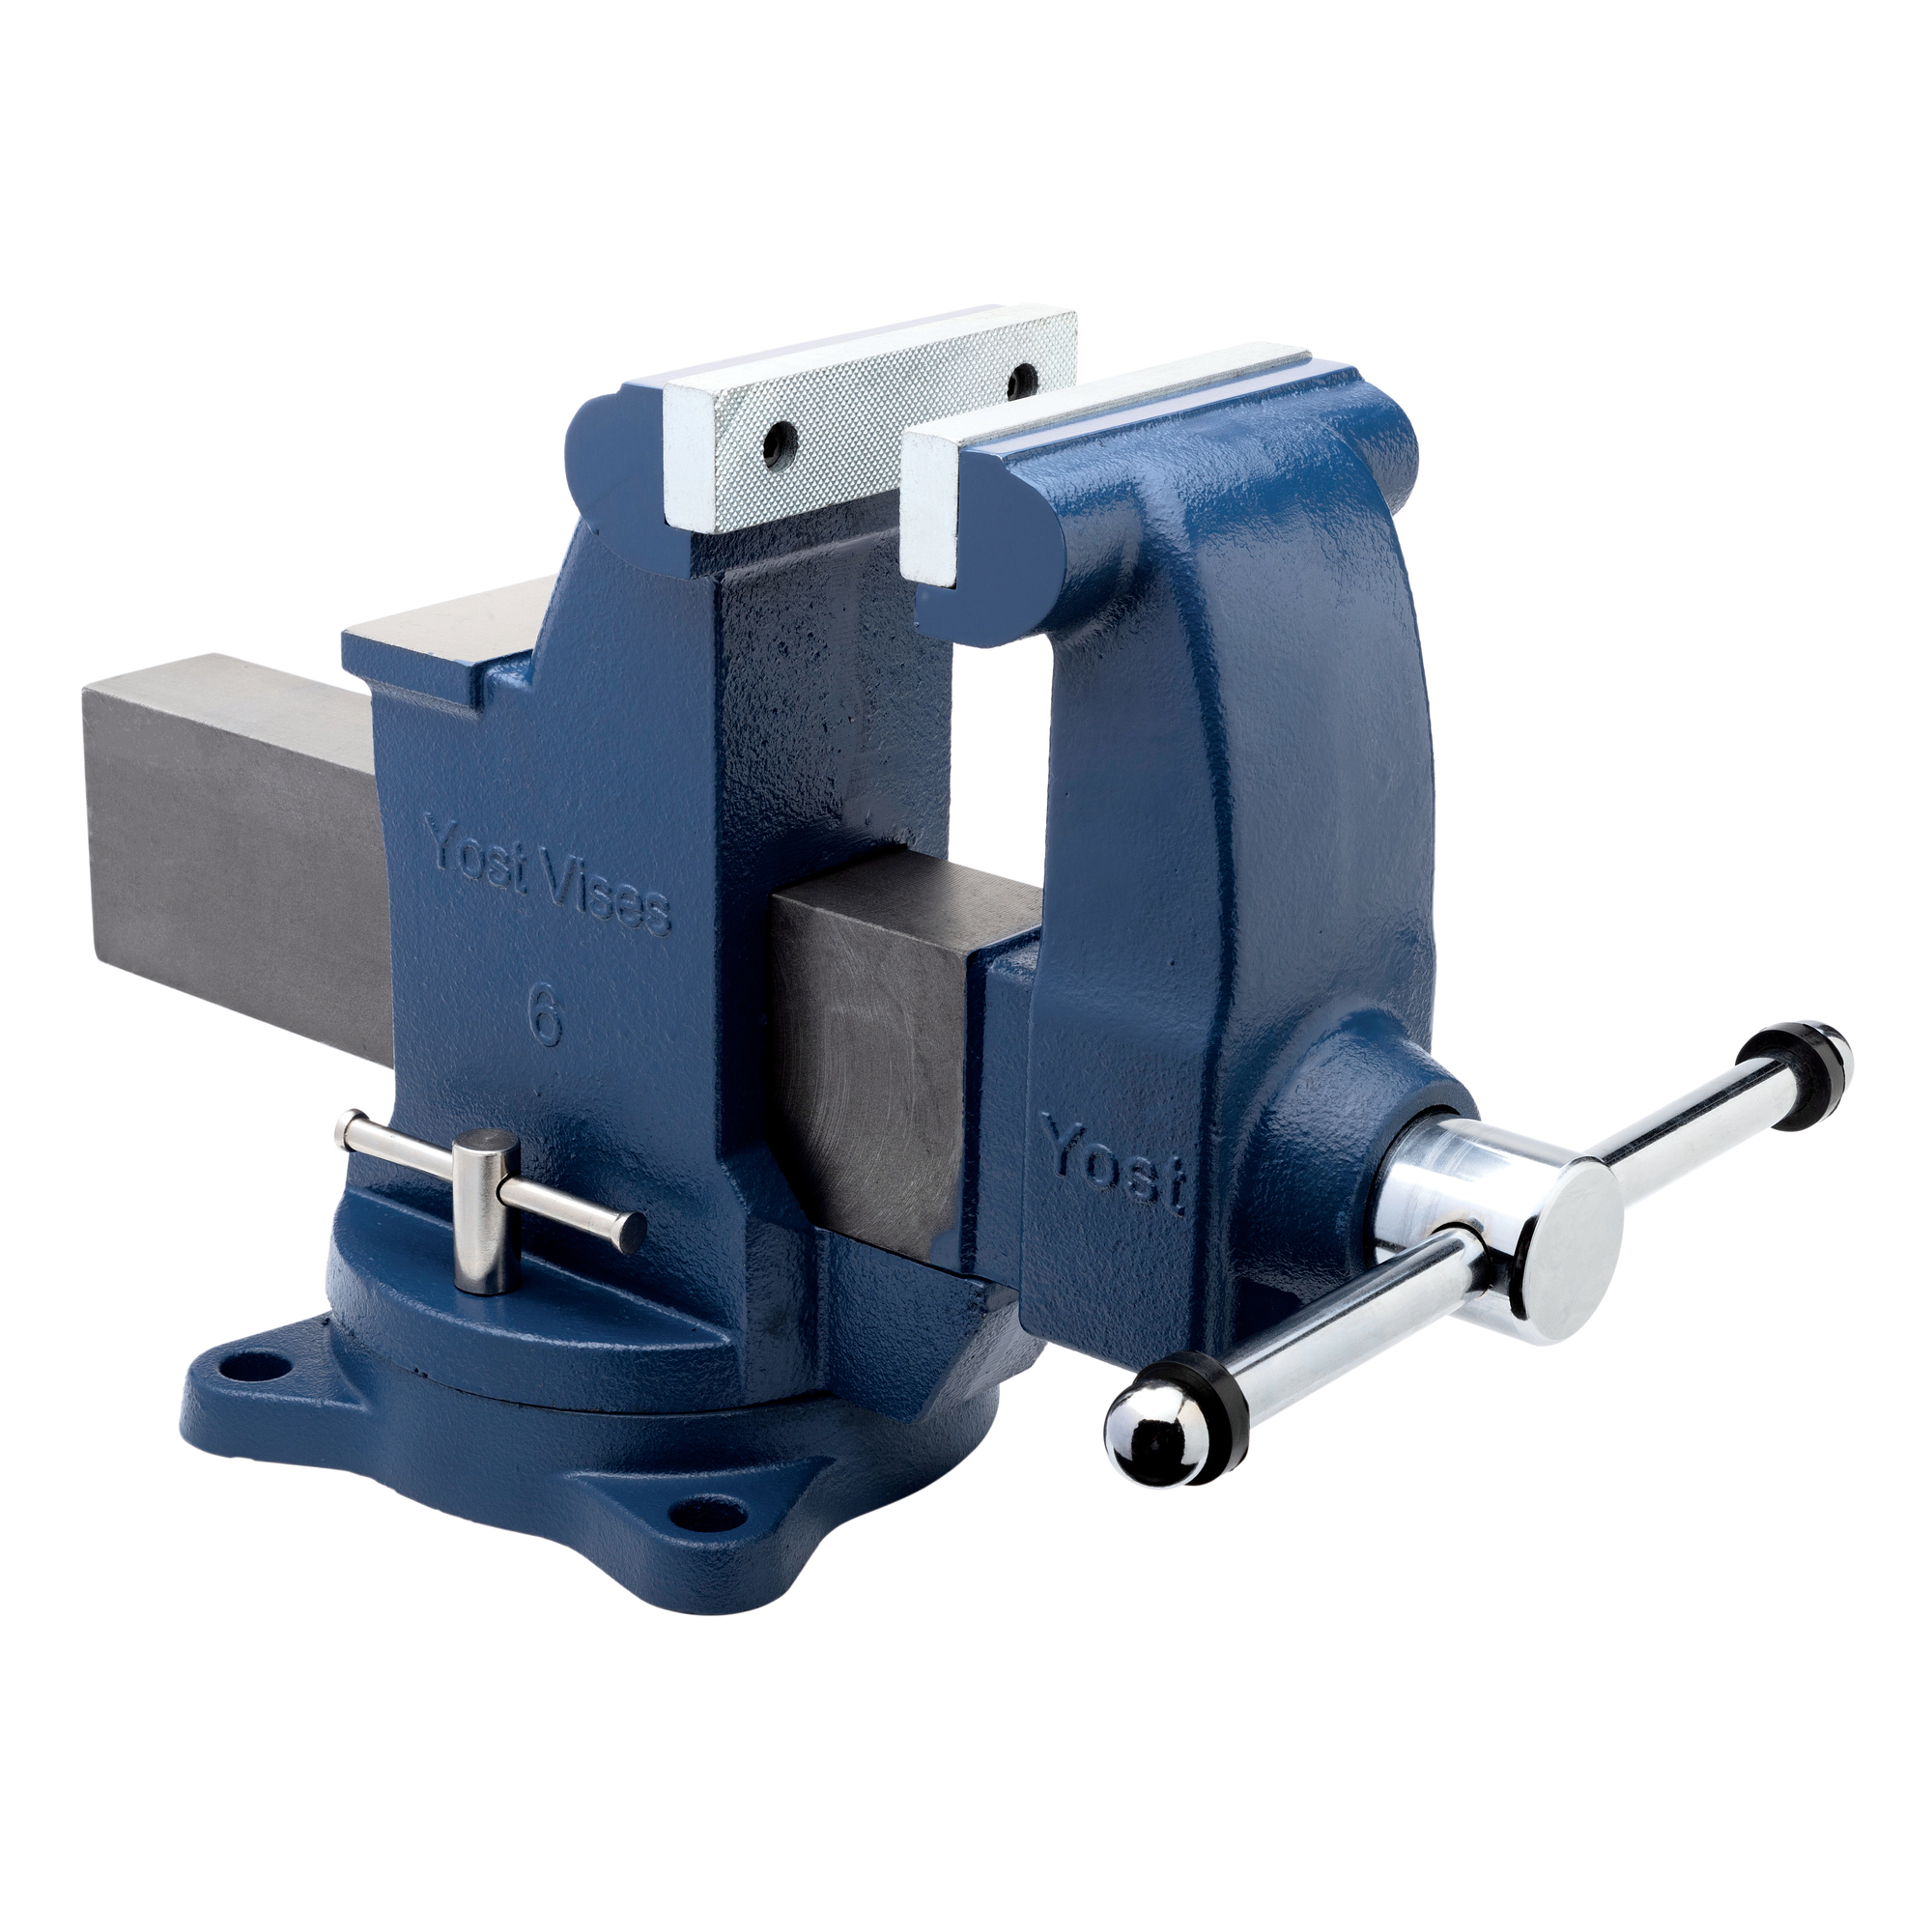 Yost Vises, 6Inch HD Vise Swivel Base, Jaw Width 6 in, Jaw Capacity 10 in, Material Ductile Iron, Model 206